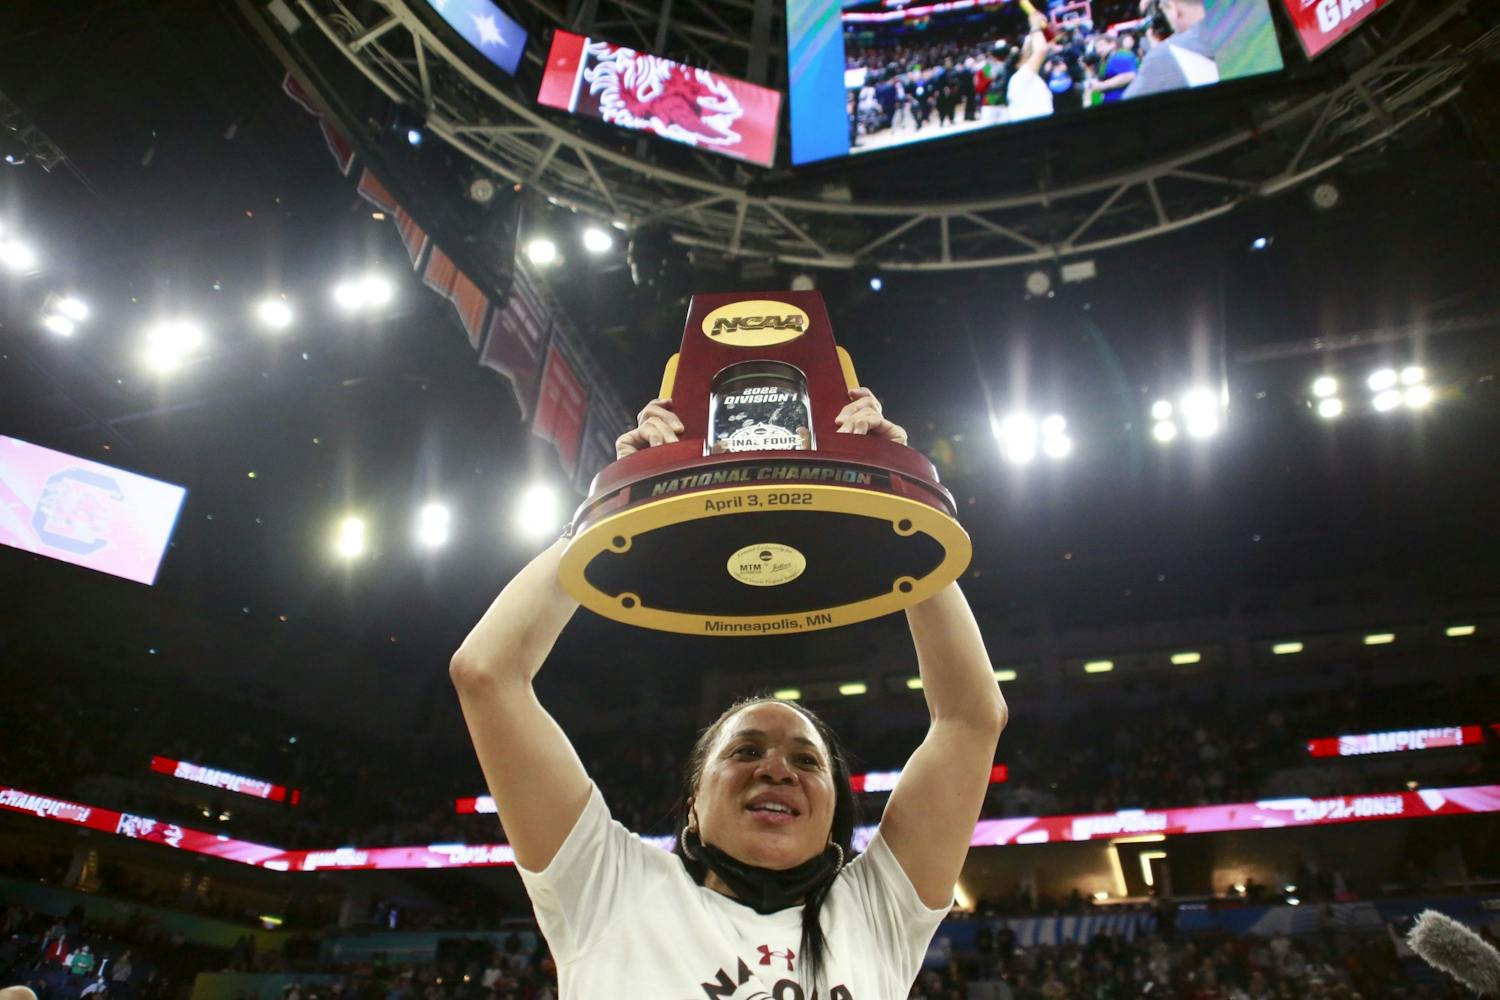 The South Carolina Gamecocks defeated the University of Connecticut Huskies 64-49 in the National Championship on April 4, 2022. This is the second time head coach Dawn Staley has led the Gamecocks to a national title after the 2017 team secured 鶹С򽴫ý's first women's basketball national championship win.&nbsp;